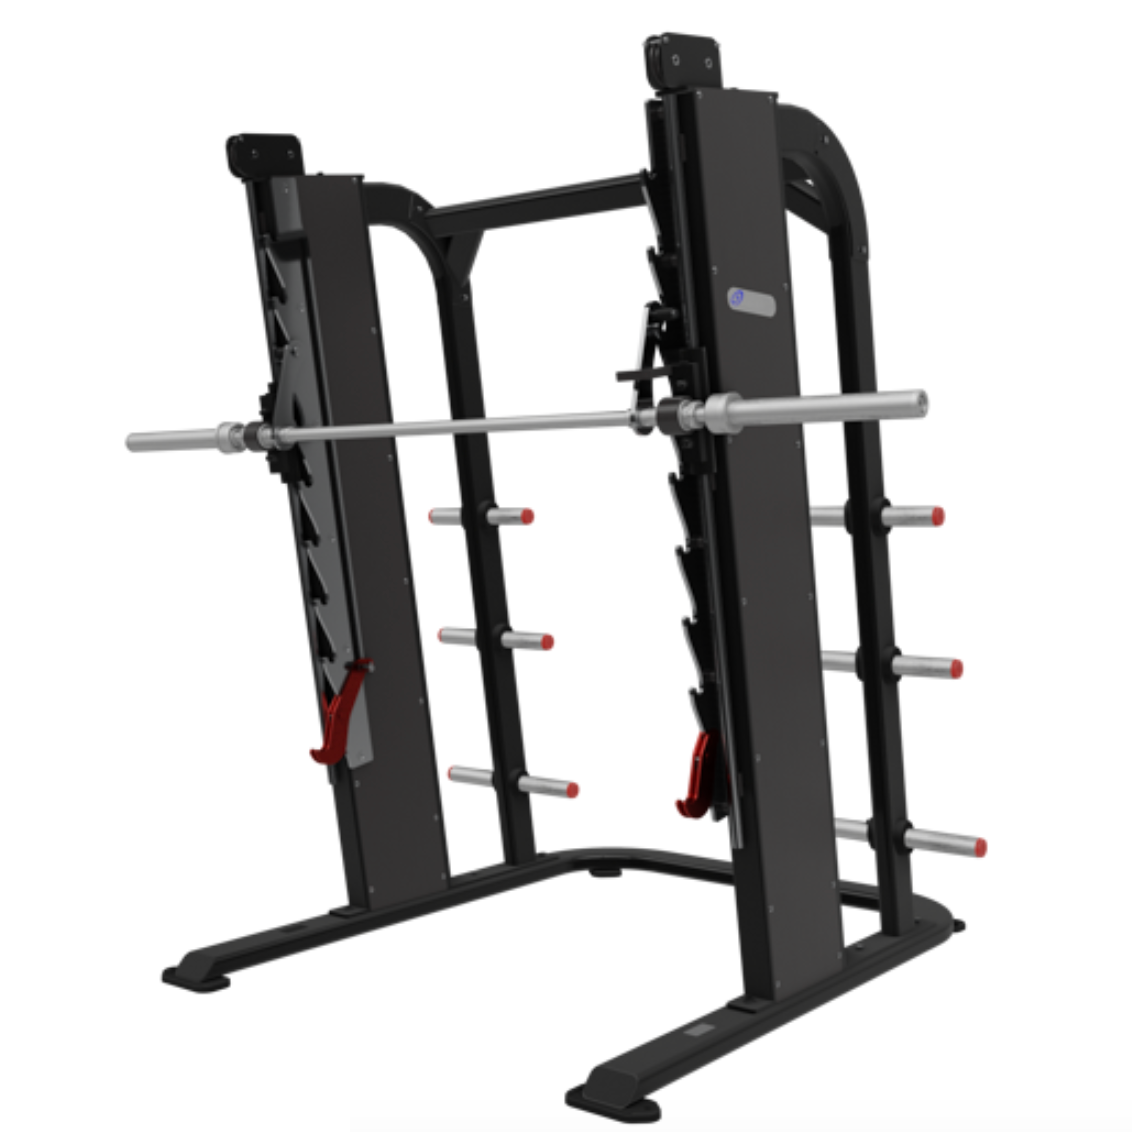 95 Recomended How much does a nautilus smith machine bar weigh for Workout Routine